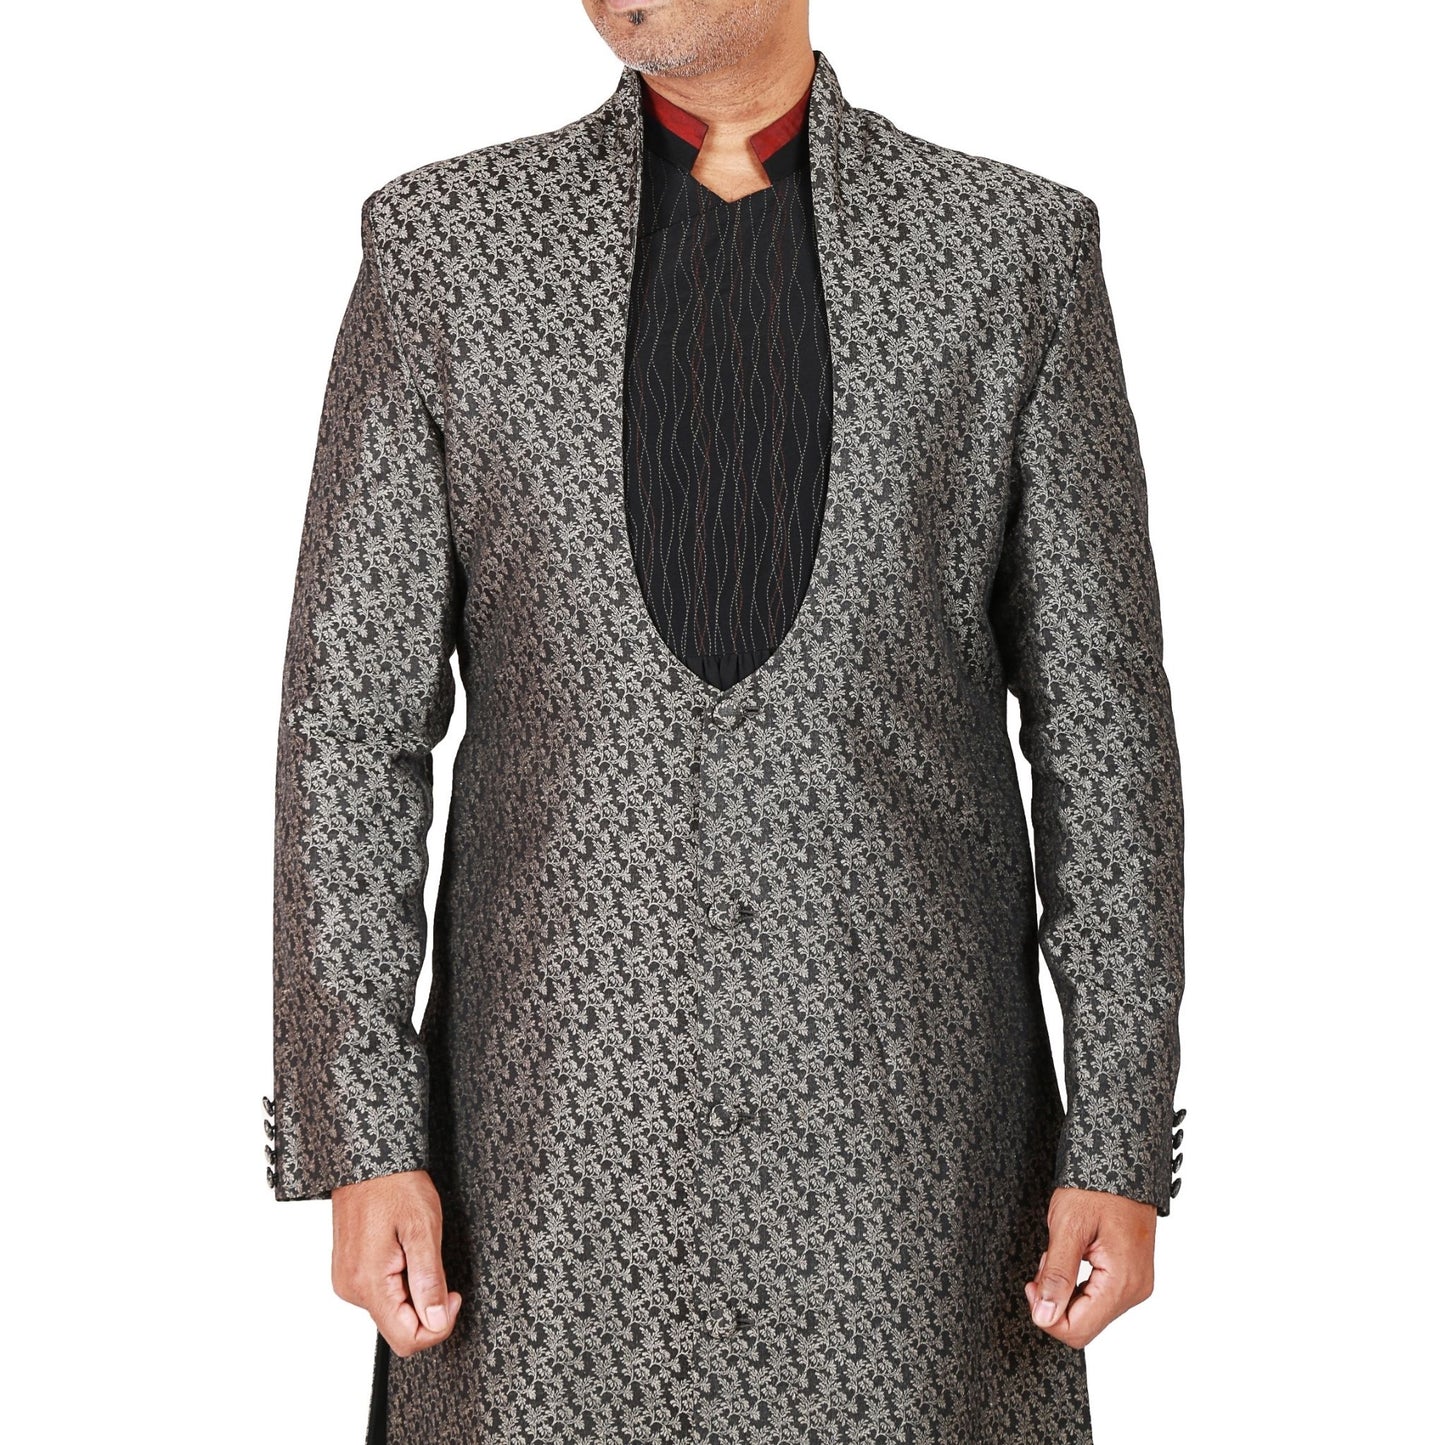 Sherwani in linen silk jaquard with built up neck